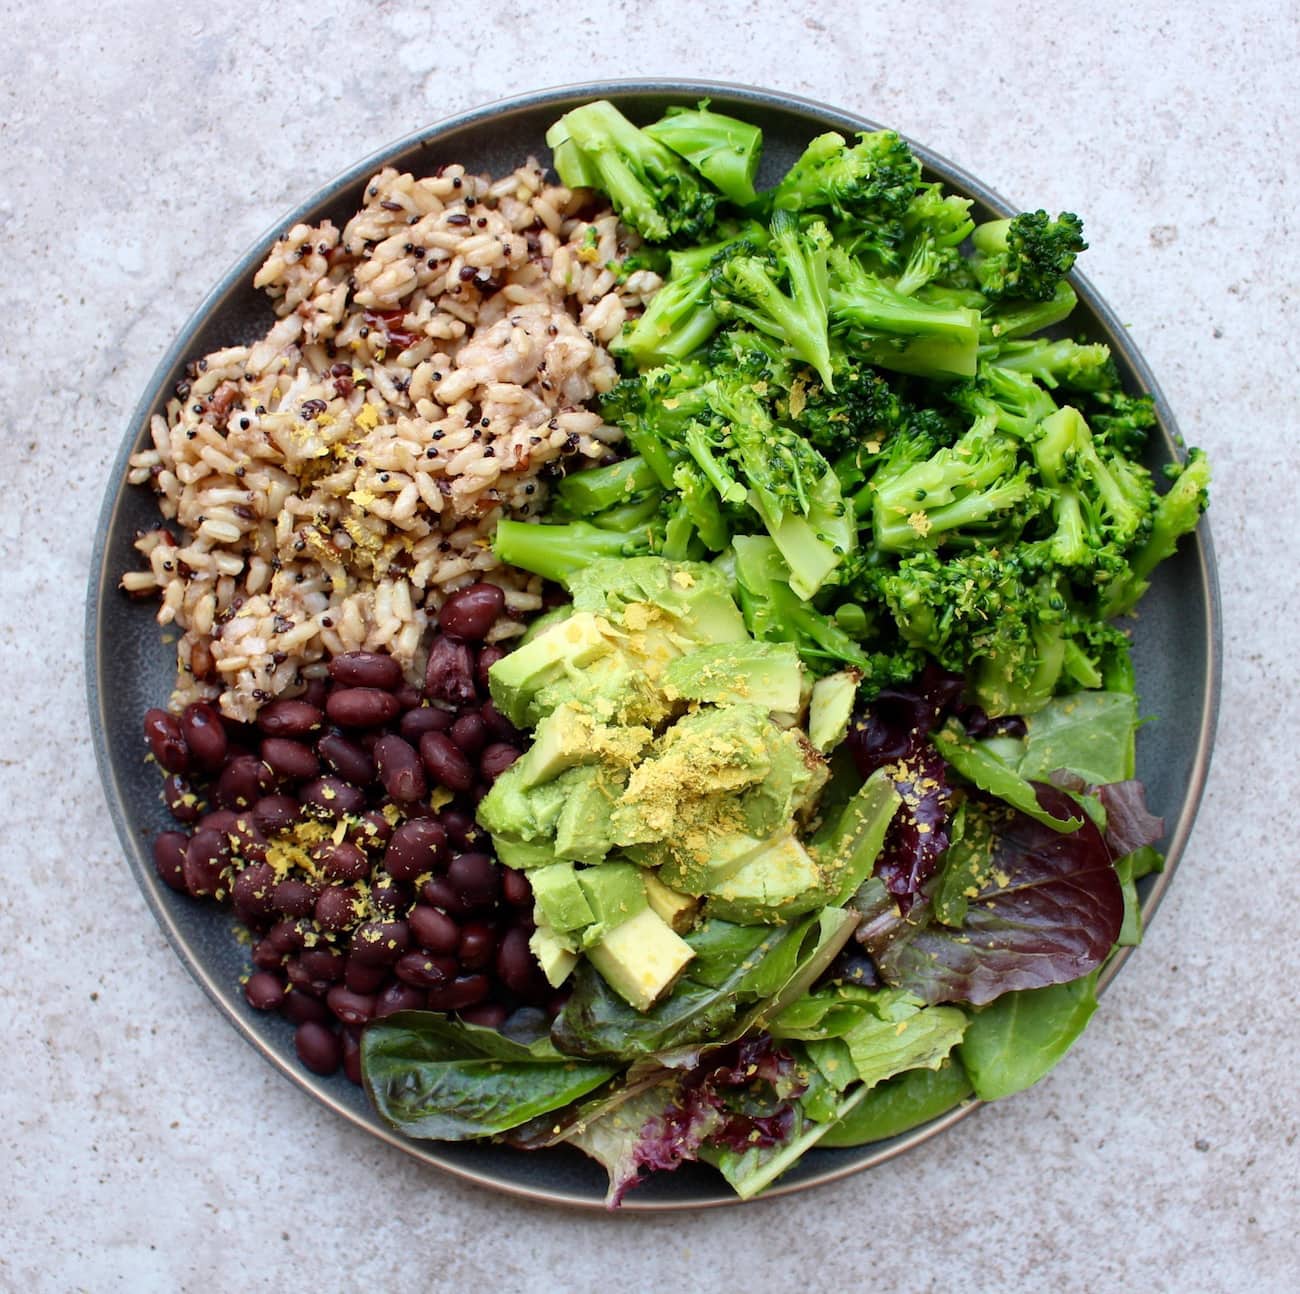 Microwaveable rice with beans, broccoli and avocado